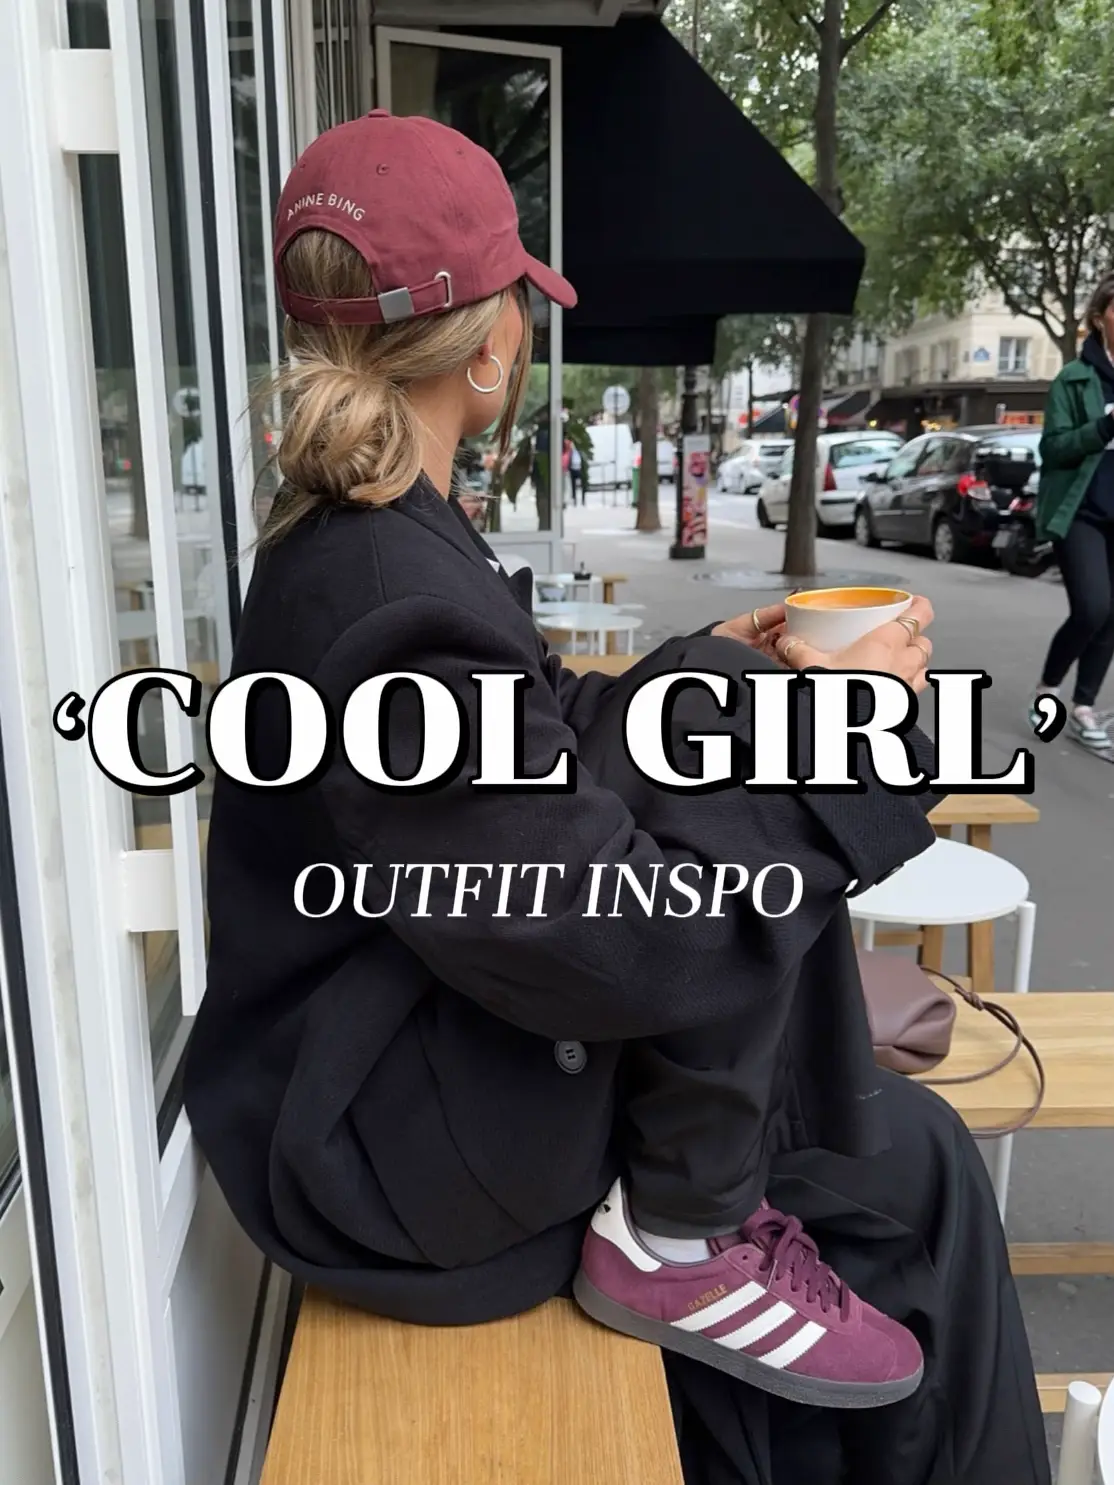 100+ EVERYDAY BADDIE OUTFIT IDEAS😍  Swag outfits for girls, Swag outfits,  Cute swag outfits